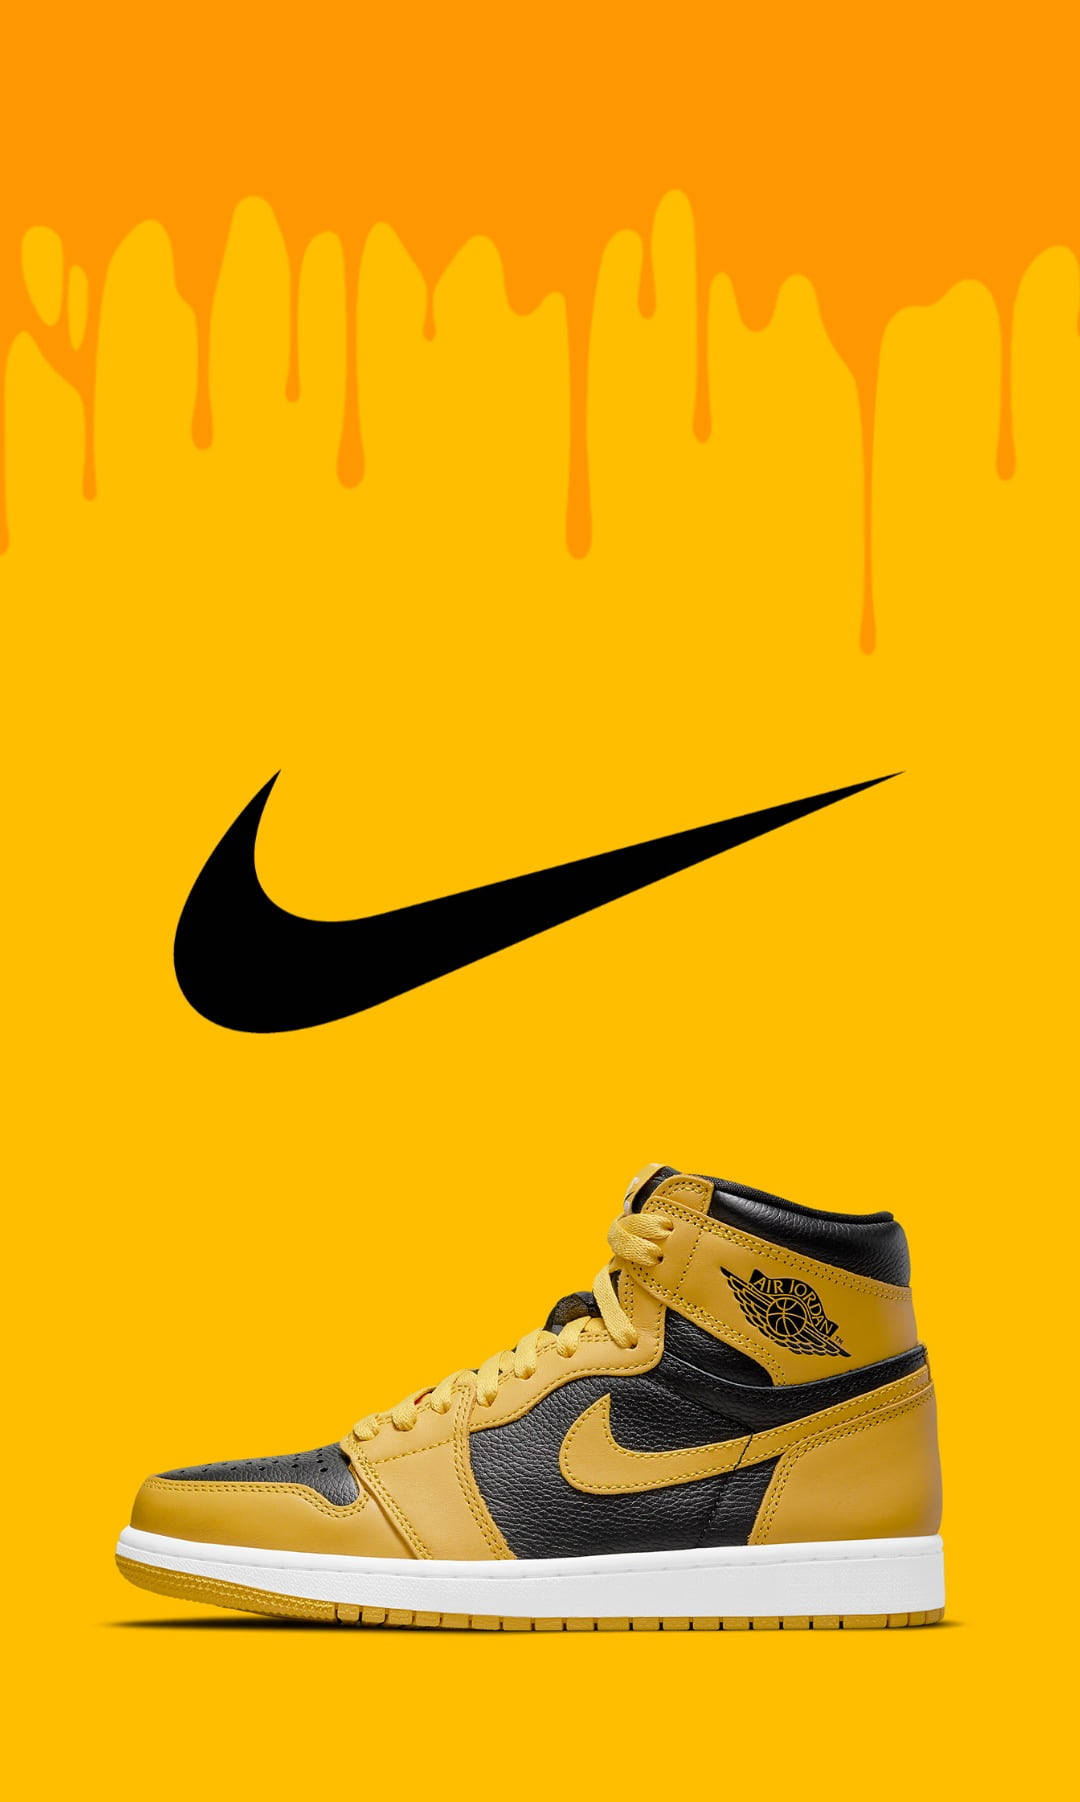 Classic style takes center stage in this Nike Jordan 1 image Wallpaper